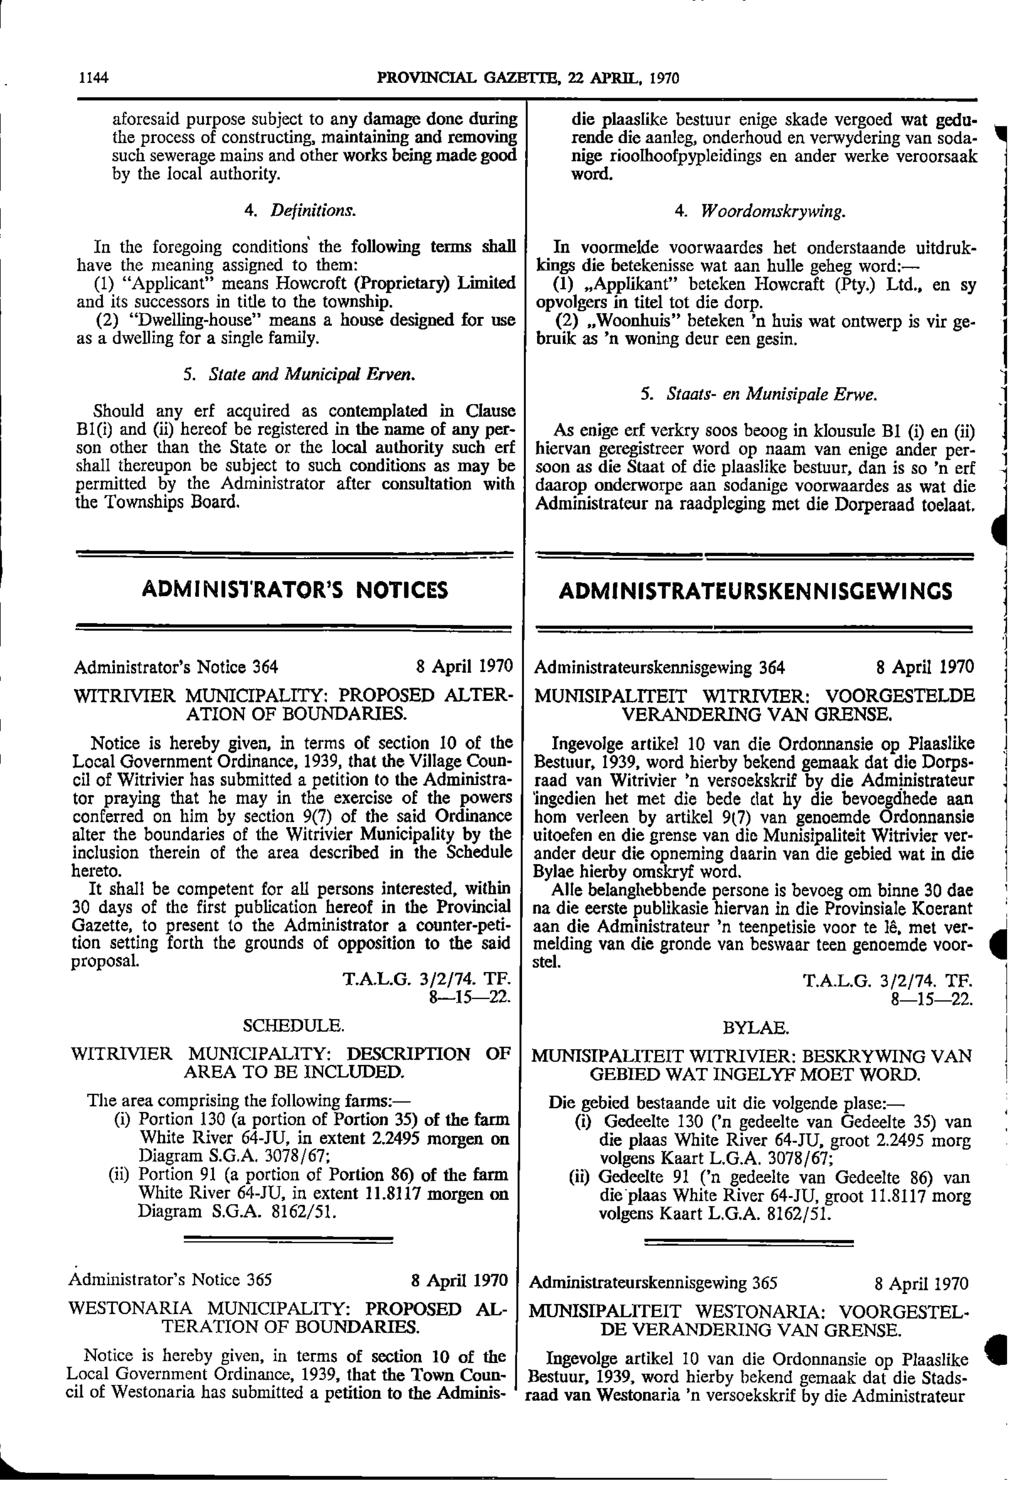 Local 1144 PROVINCIAL GAZETTE 22 APRIL 1970 aforesaid purpose subject to any damage done during die plaaslike bestuur enige skade vergoed wat geduthe process of constructing maintaining and removing